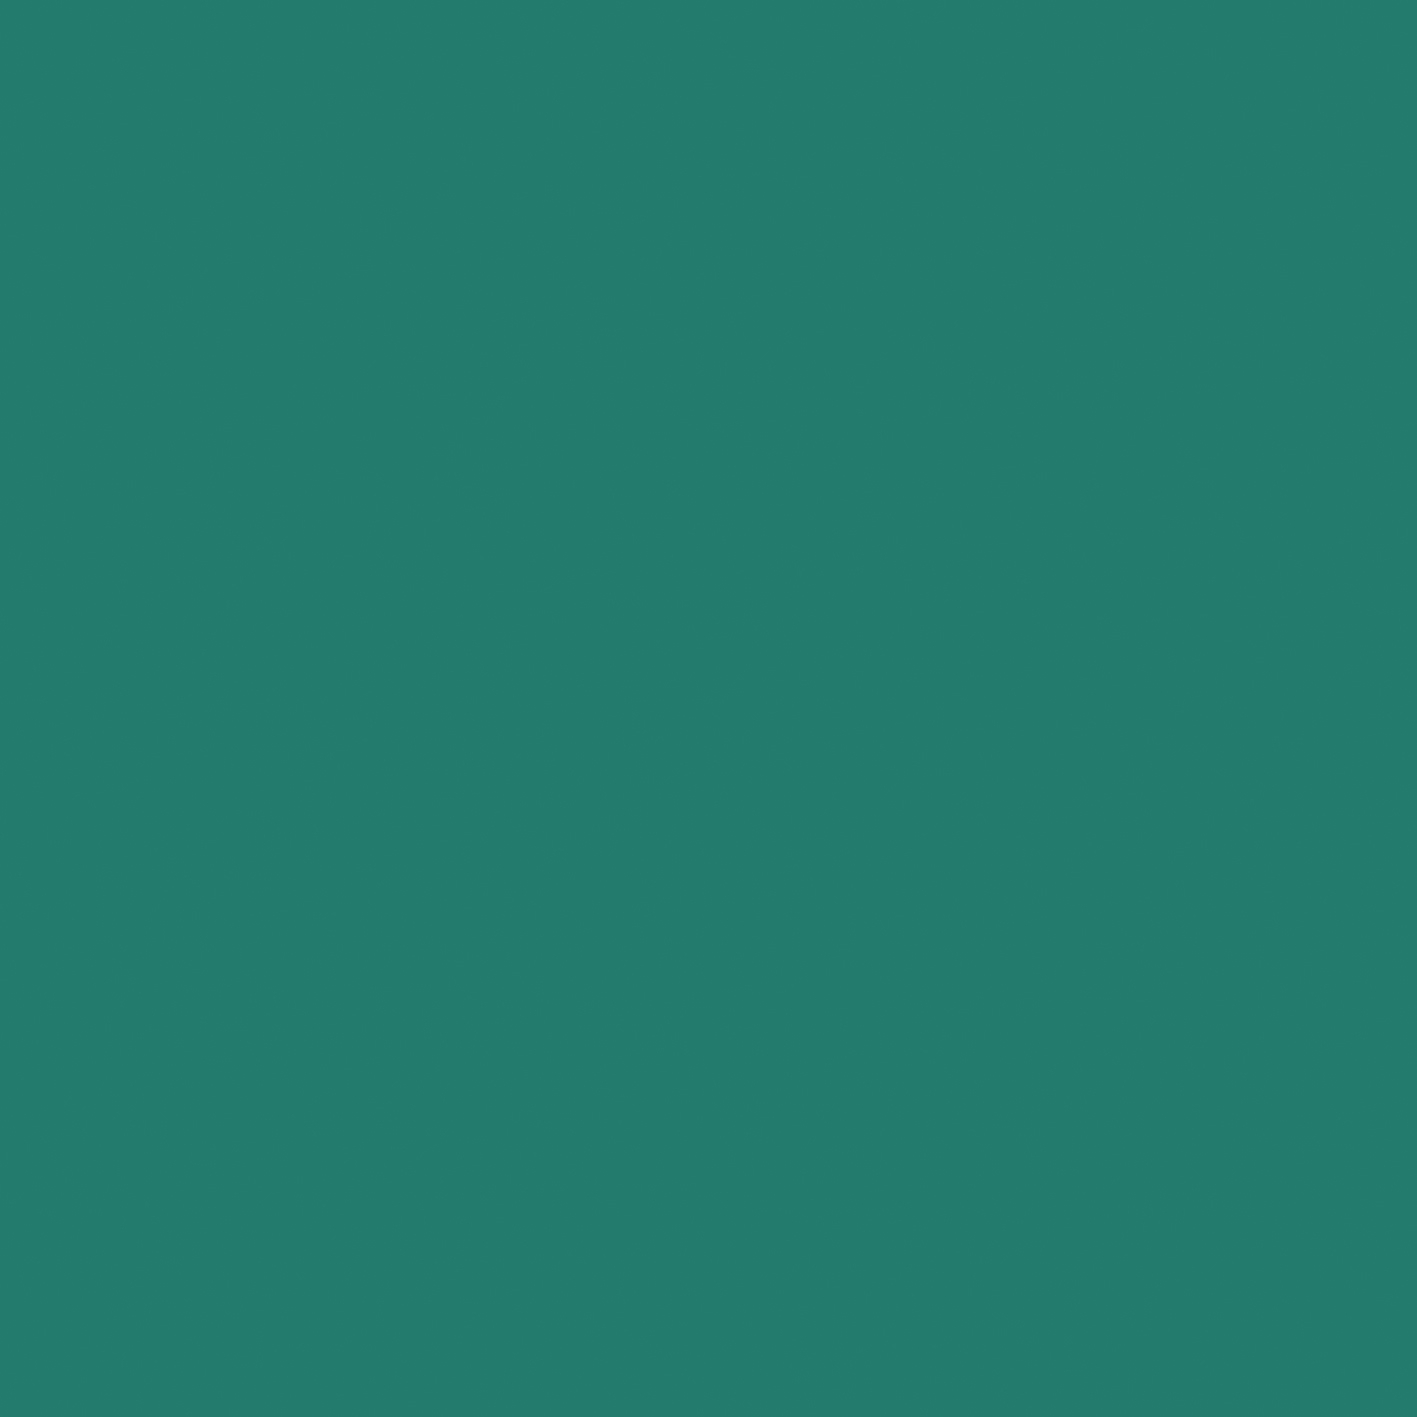 Buildtech 2.0 Bold Colors Teal Glossy 6mm 120 x 120